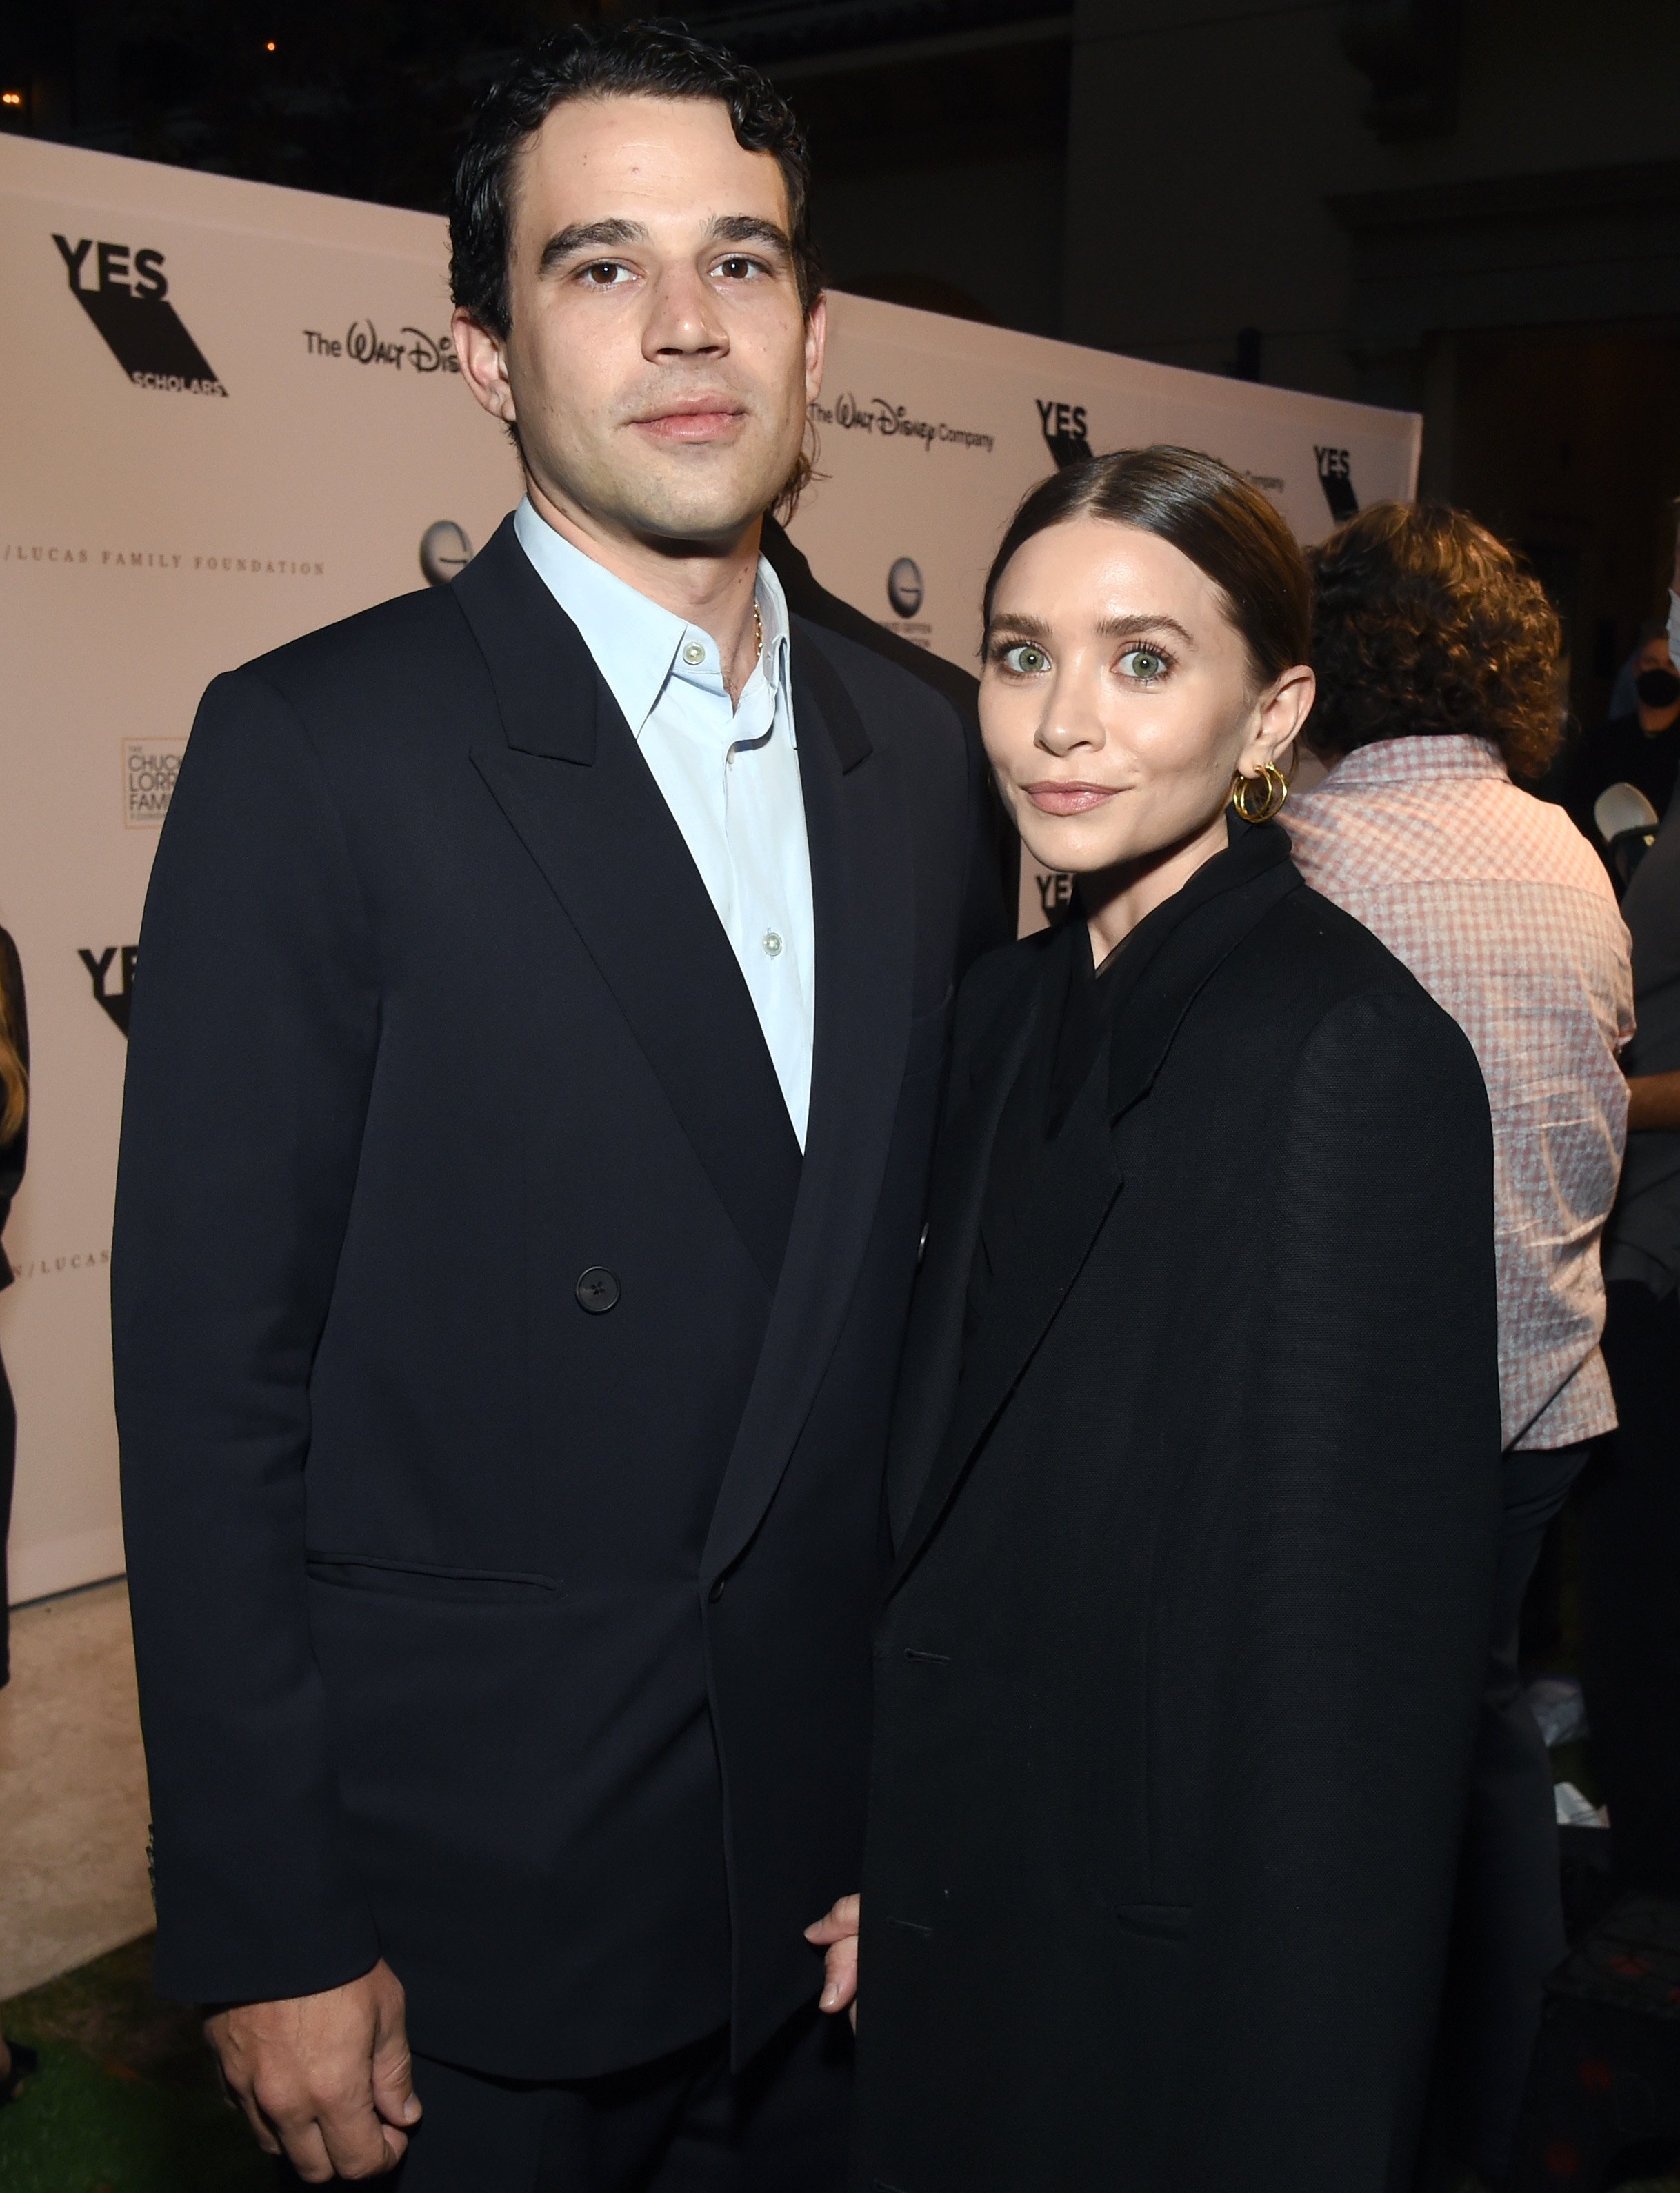 Louis Eisner and Ashley Olsen at the YES 20th Anniversary Gala on September 23, 2021 in Los Angeles, California. | Source: Getty Images